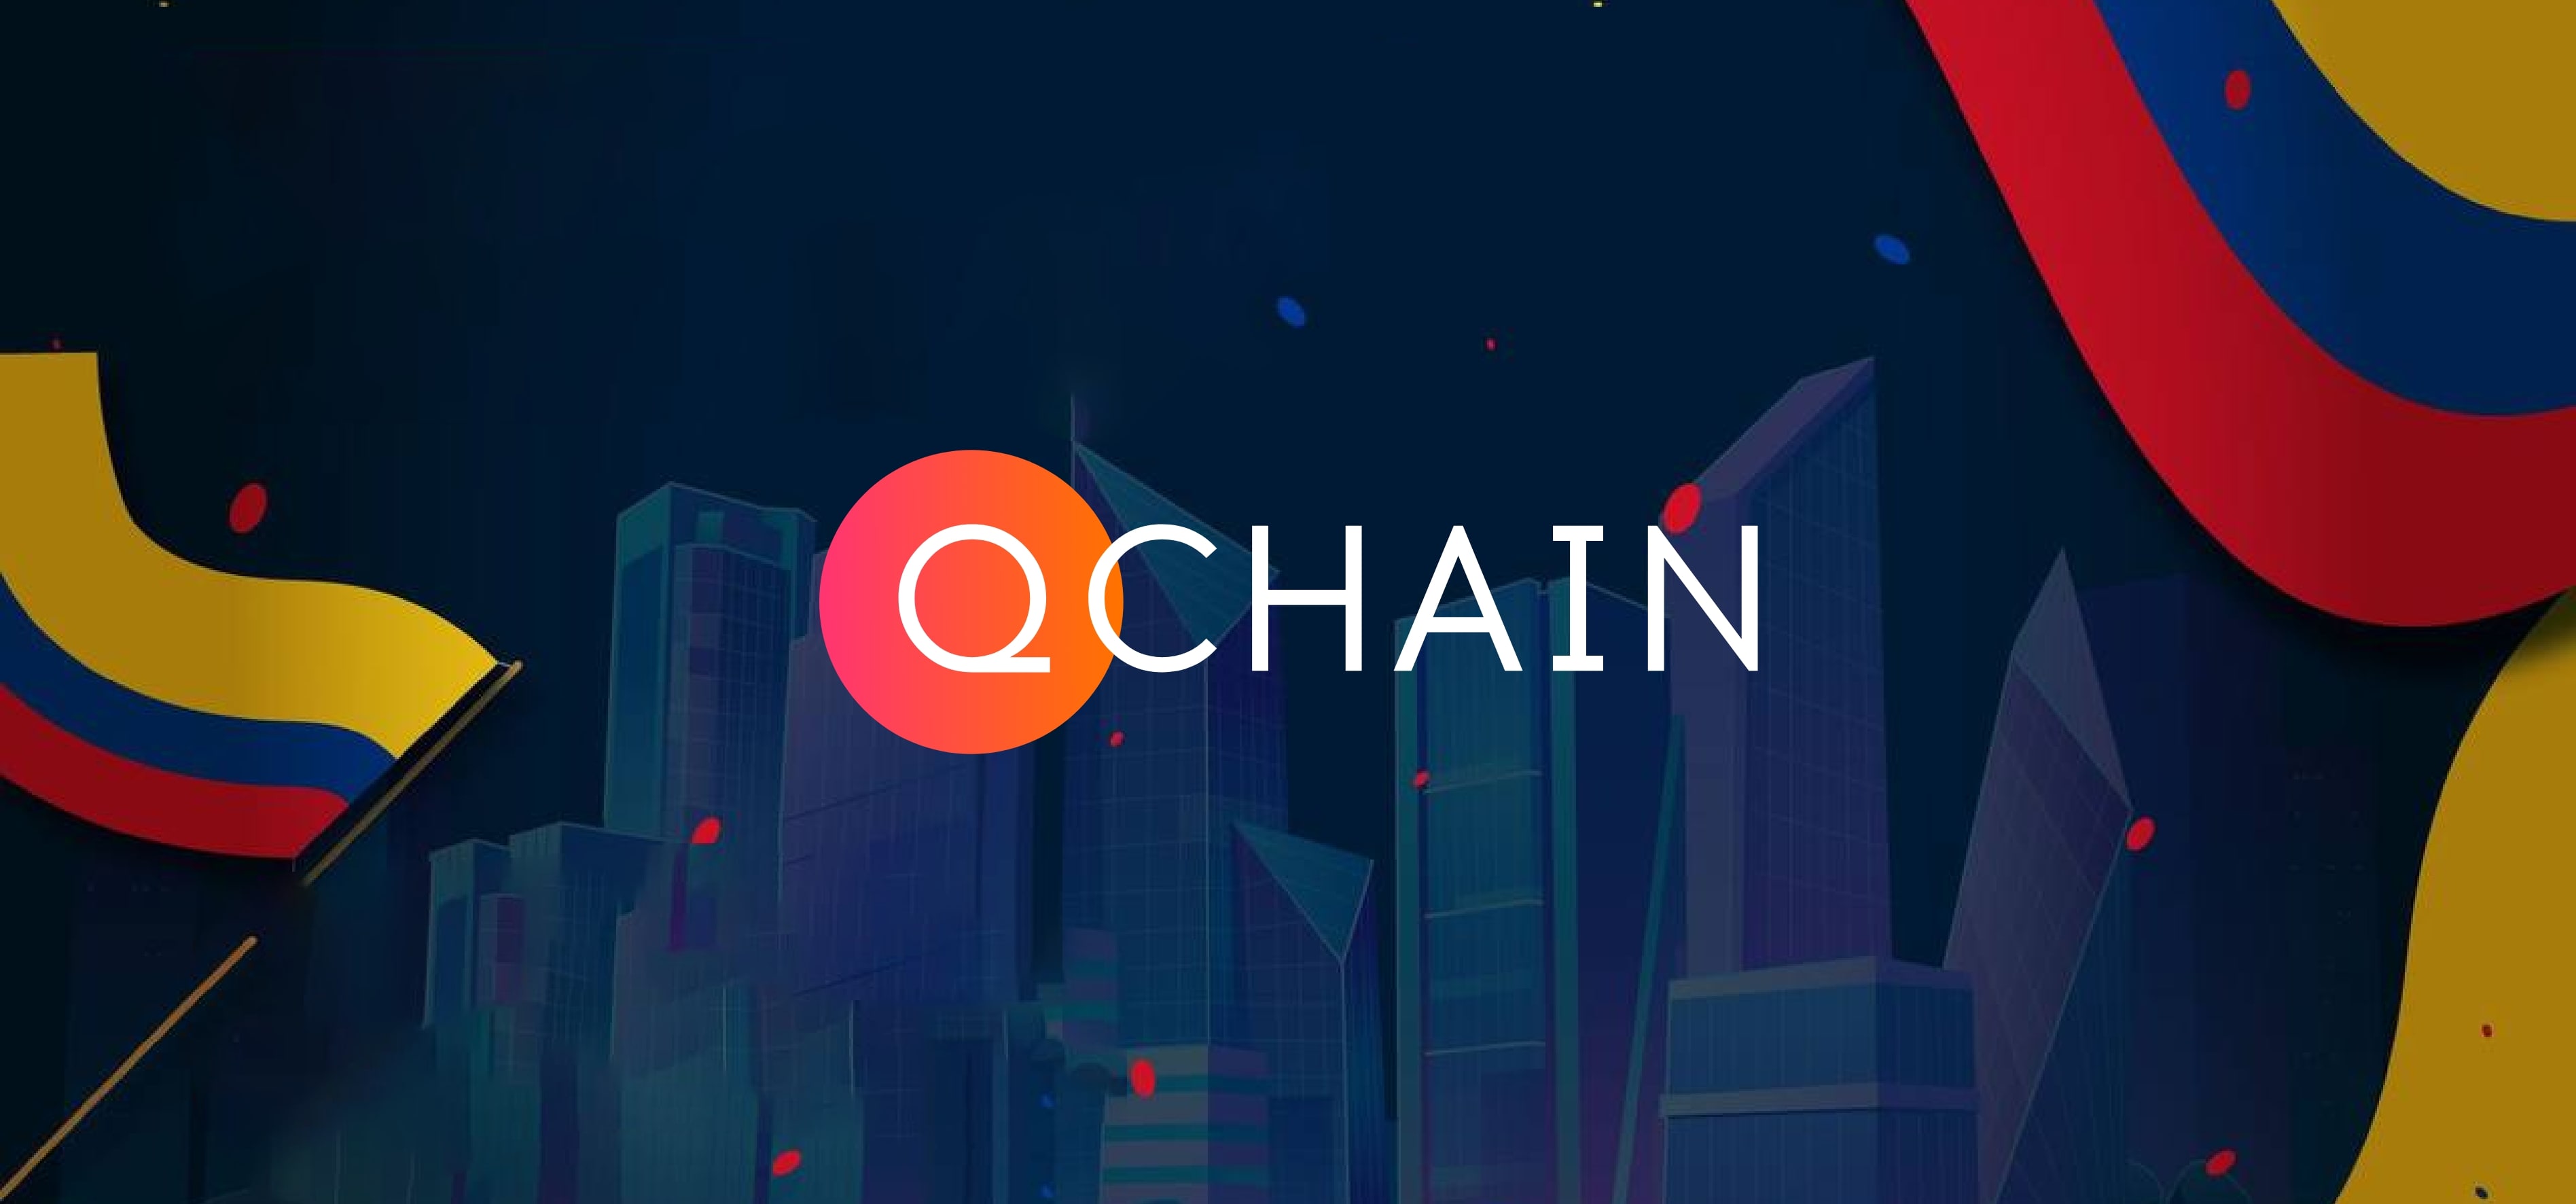 Once again Colombia, once again Qchain Conference